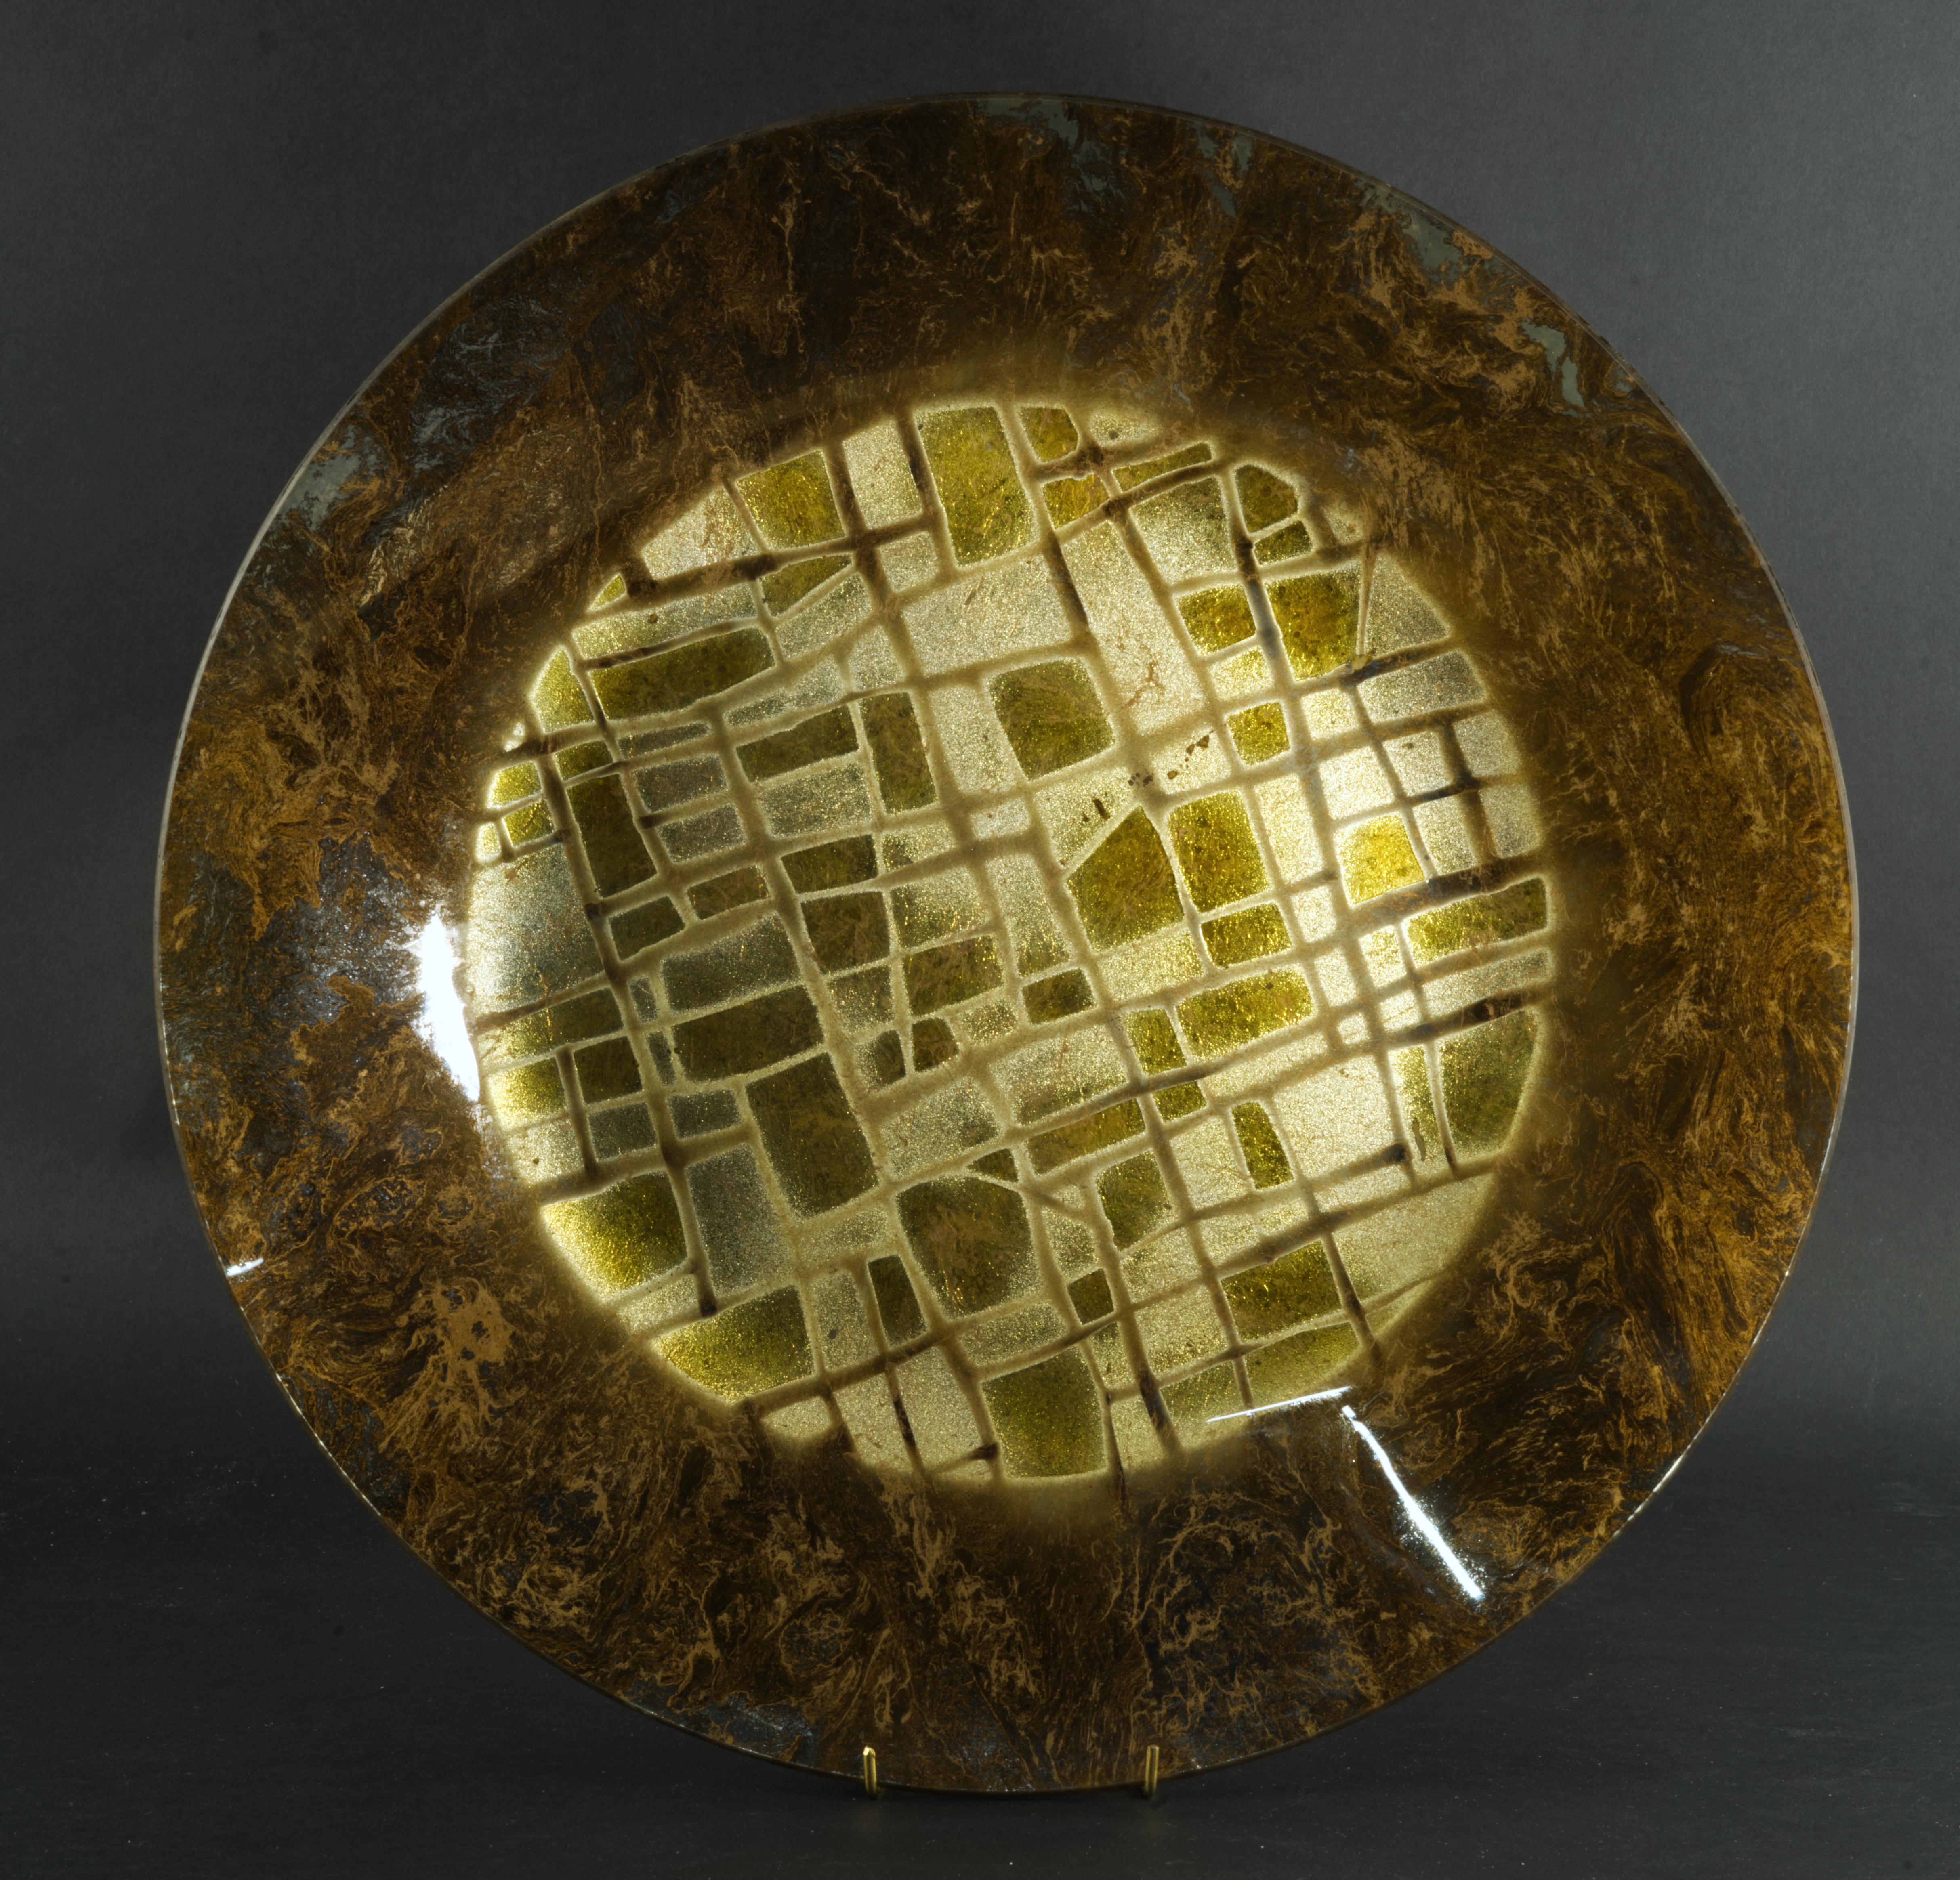 
Rare centerpiece glass plate or bowl was handmade by Dick Talbett for his studio Ancient Glass in 1950s as a part of Radiant Temple series. The bowl features abstract graphic pattern in gold and silver in the center surrounded by organic, flowing